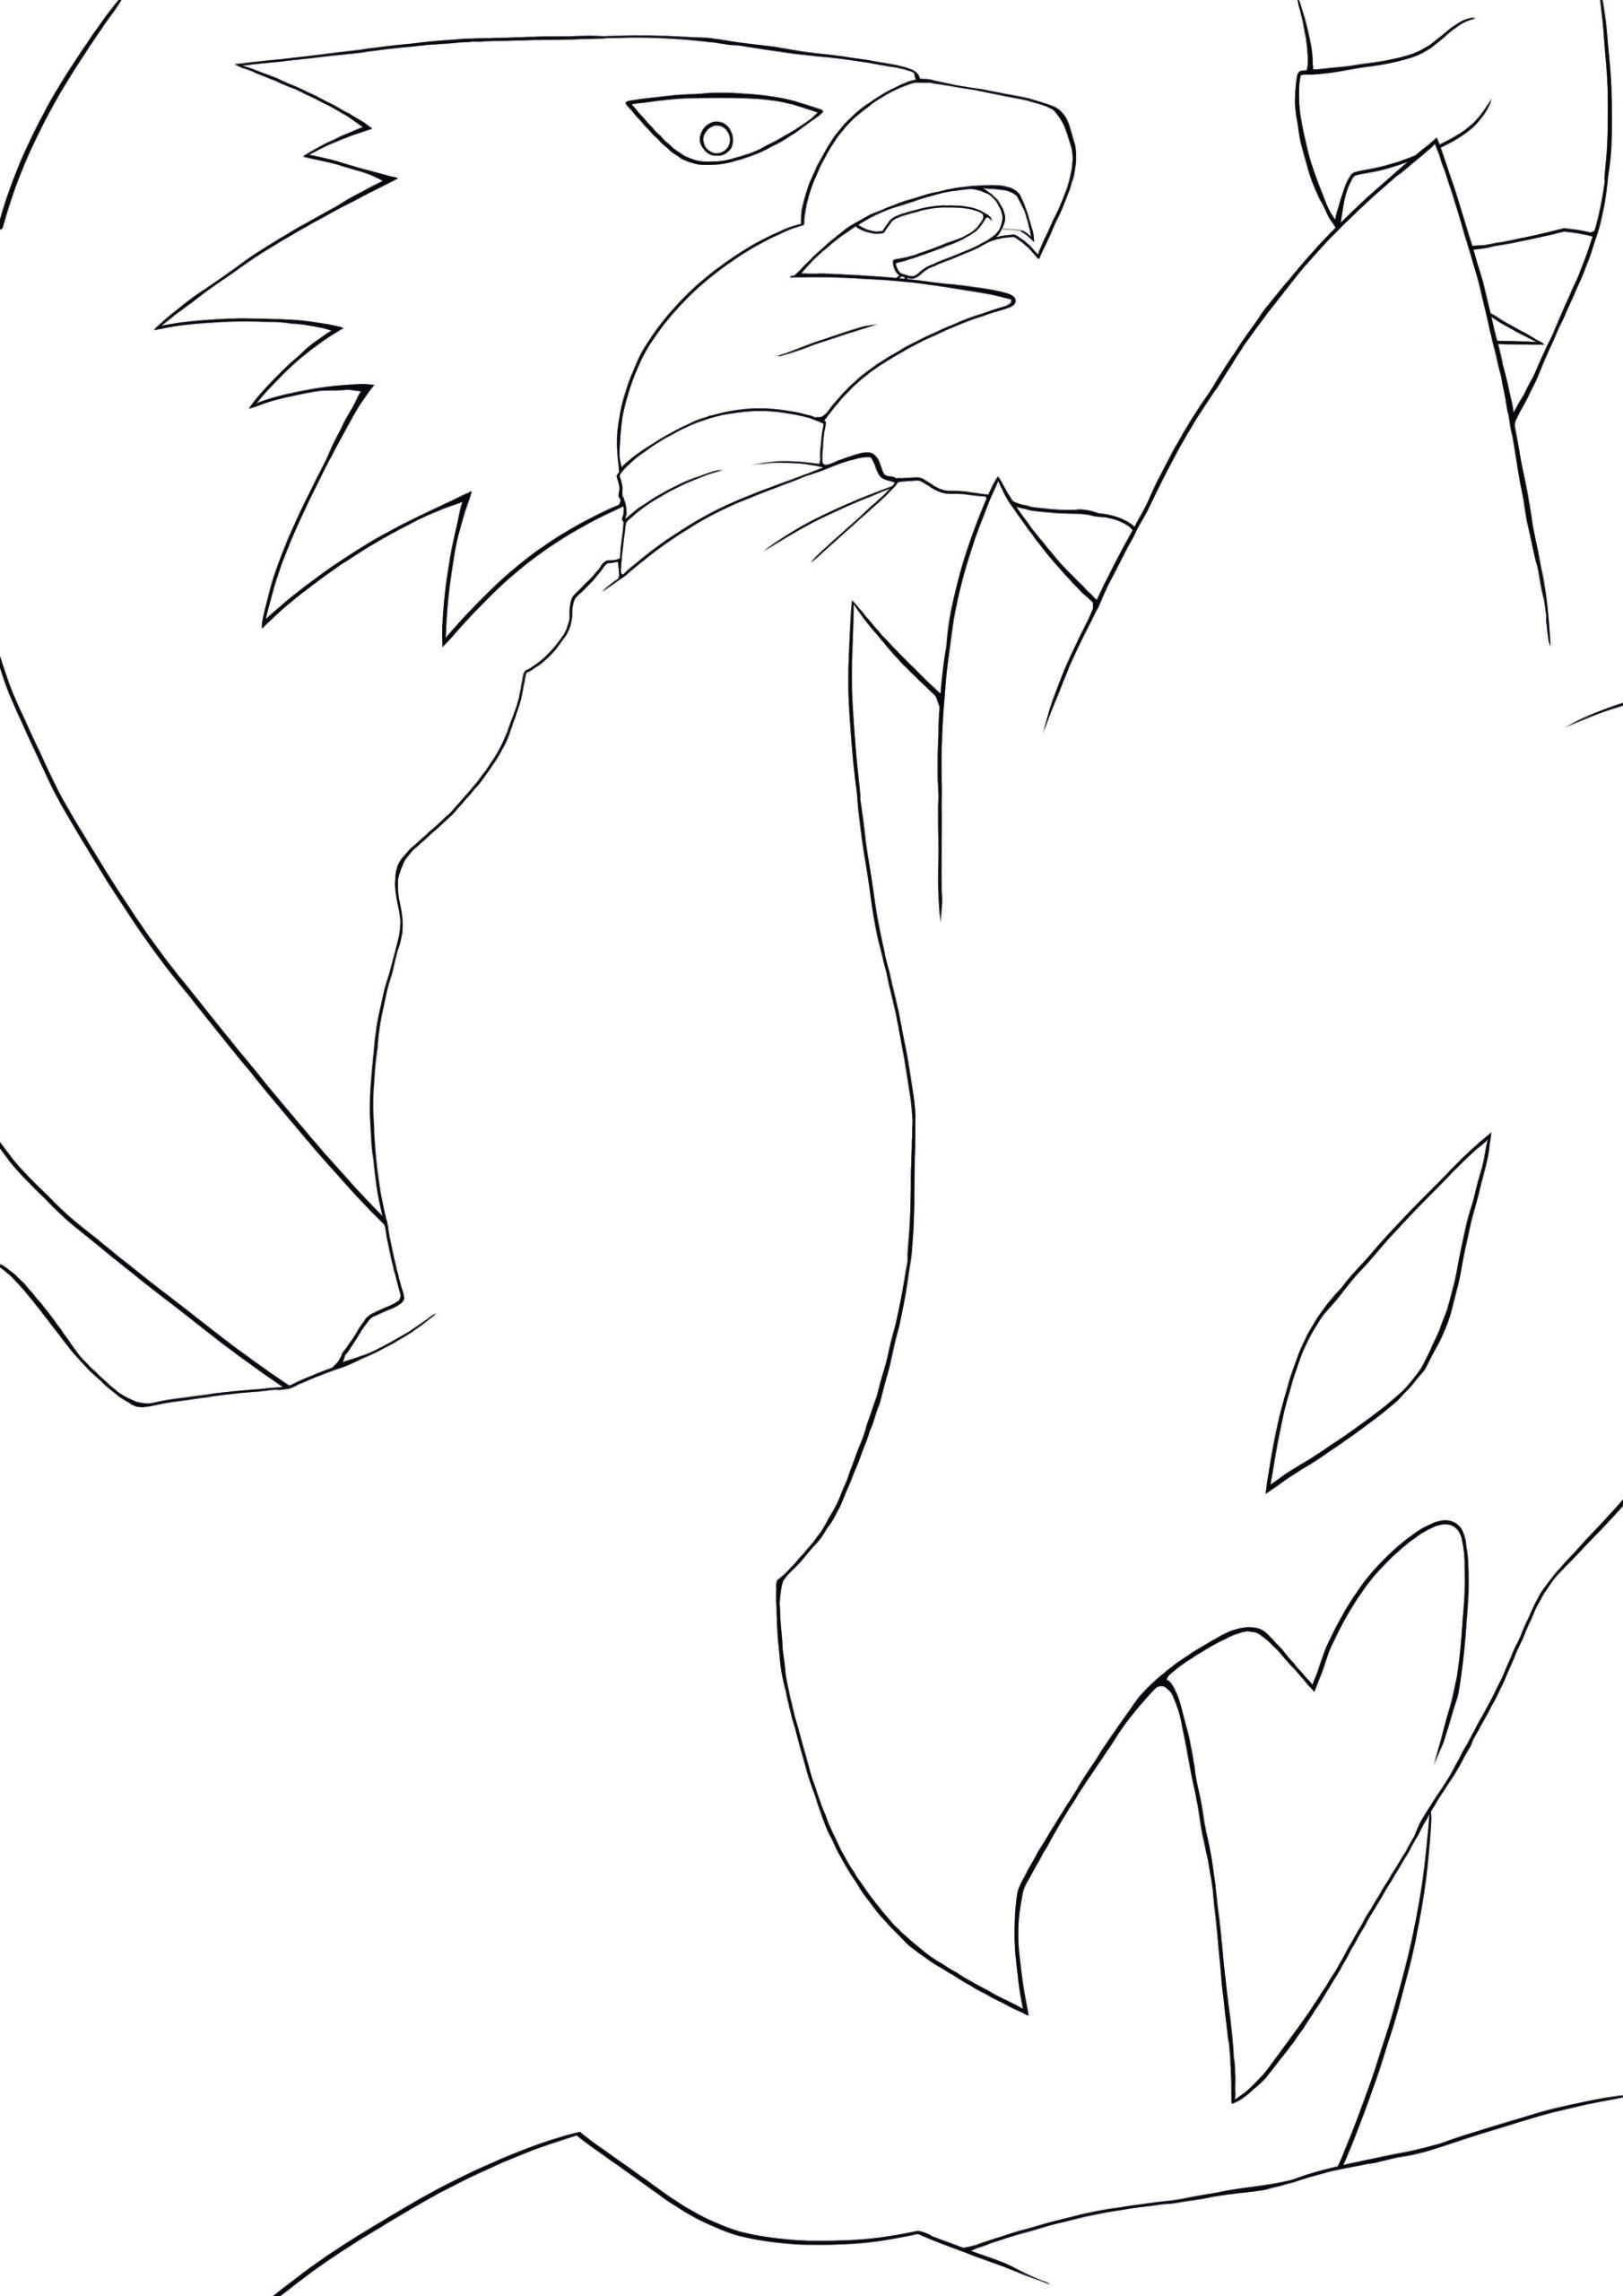 Fumikage Tokoyami 7 Coloring Page - Anime Coloring Pages